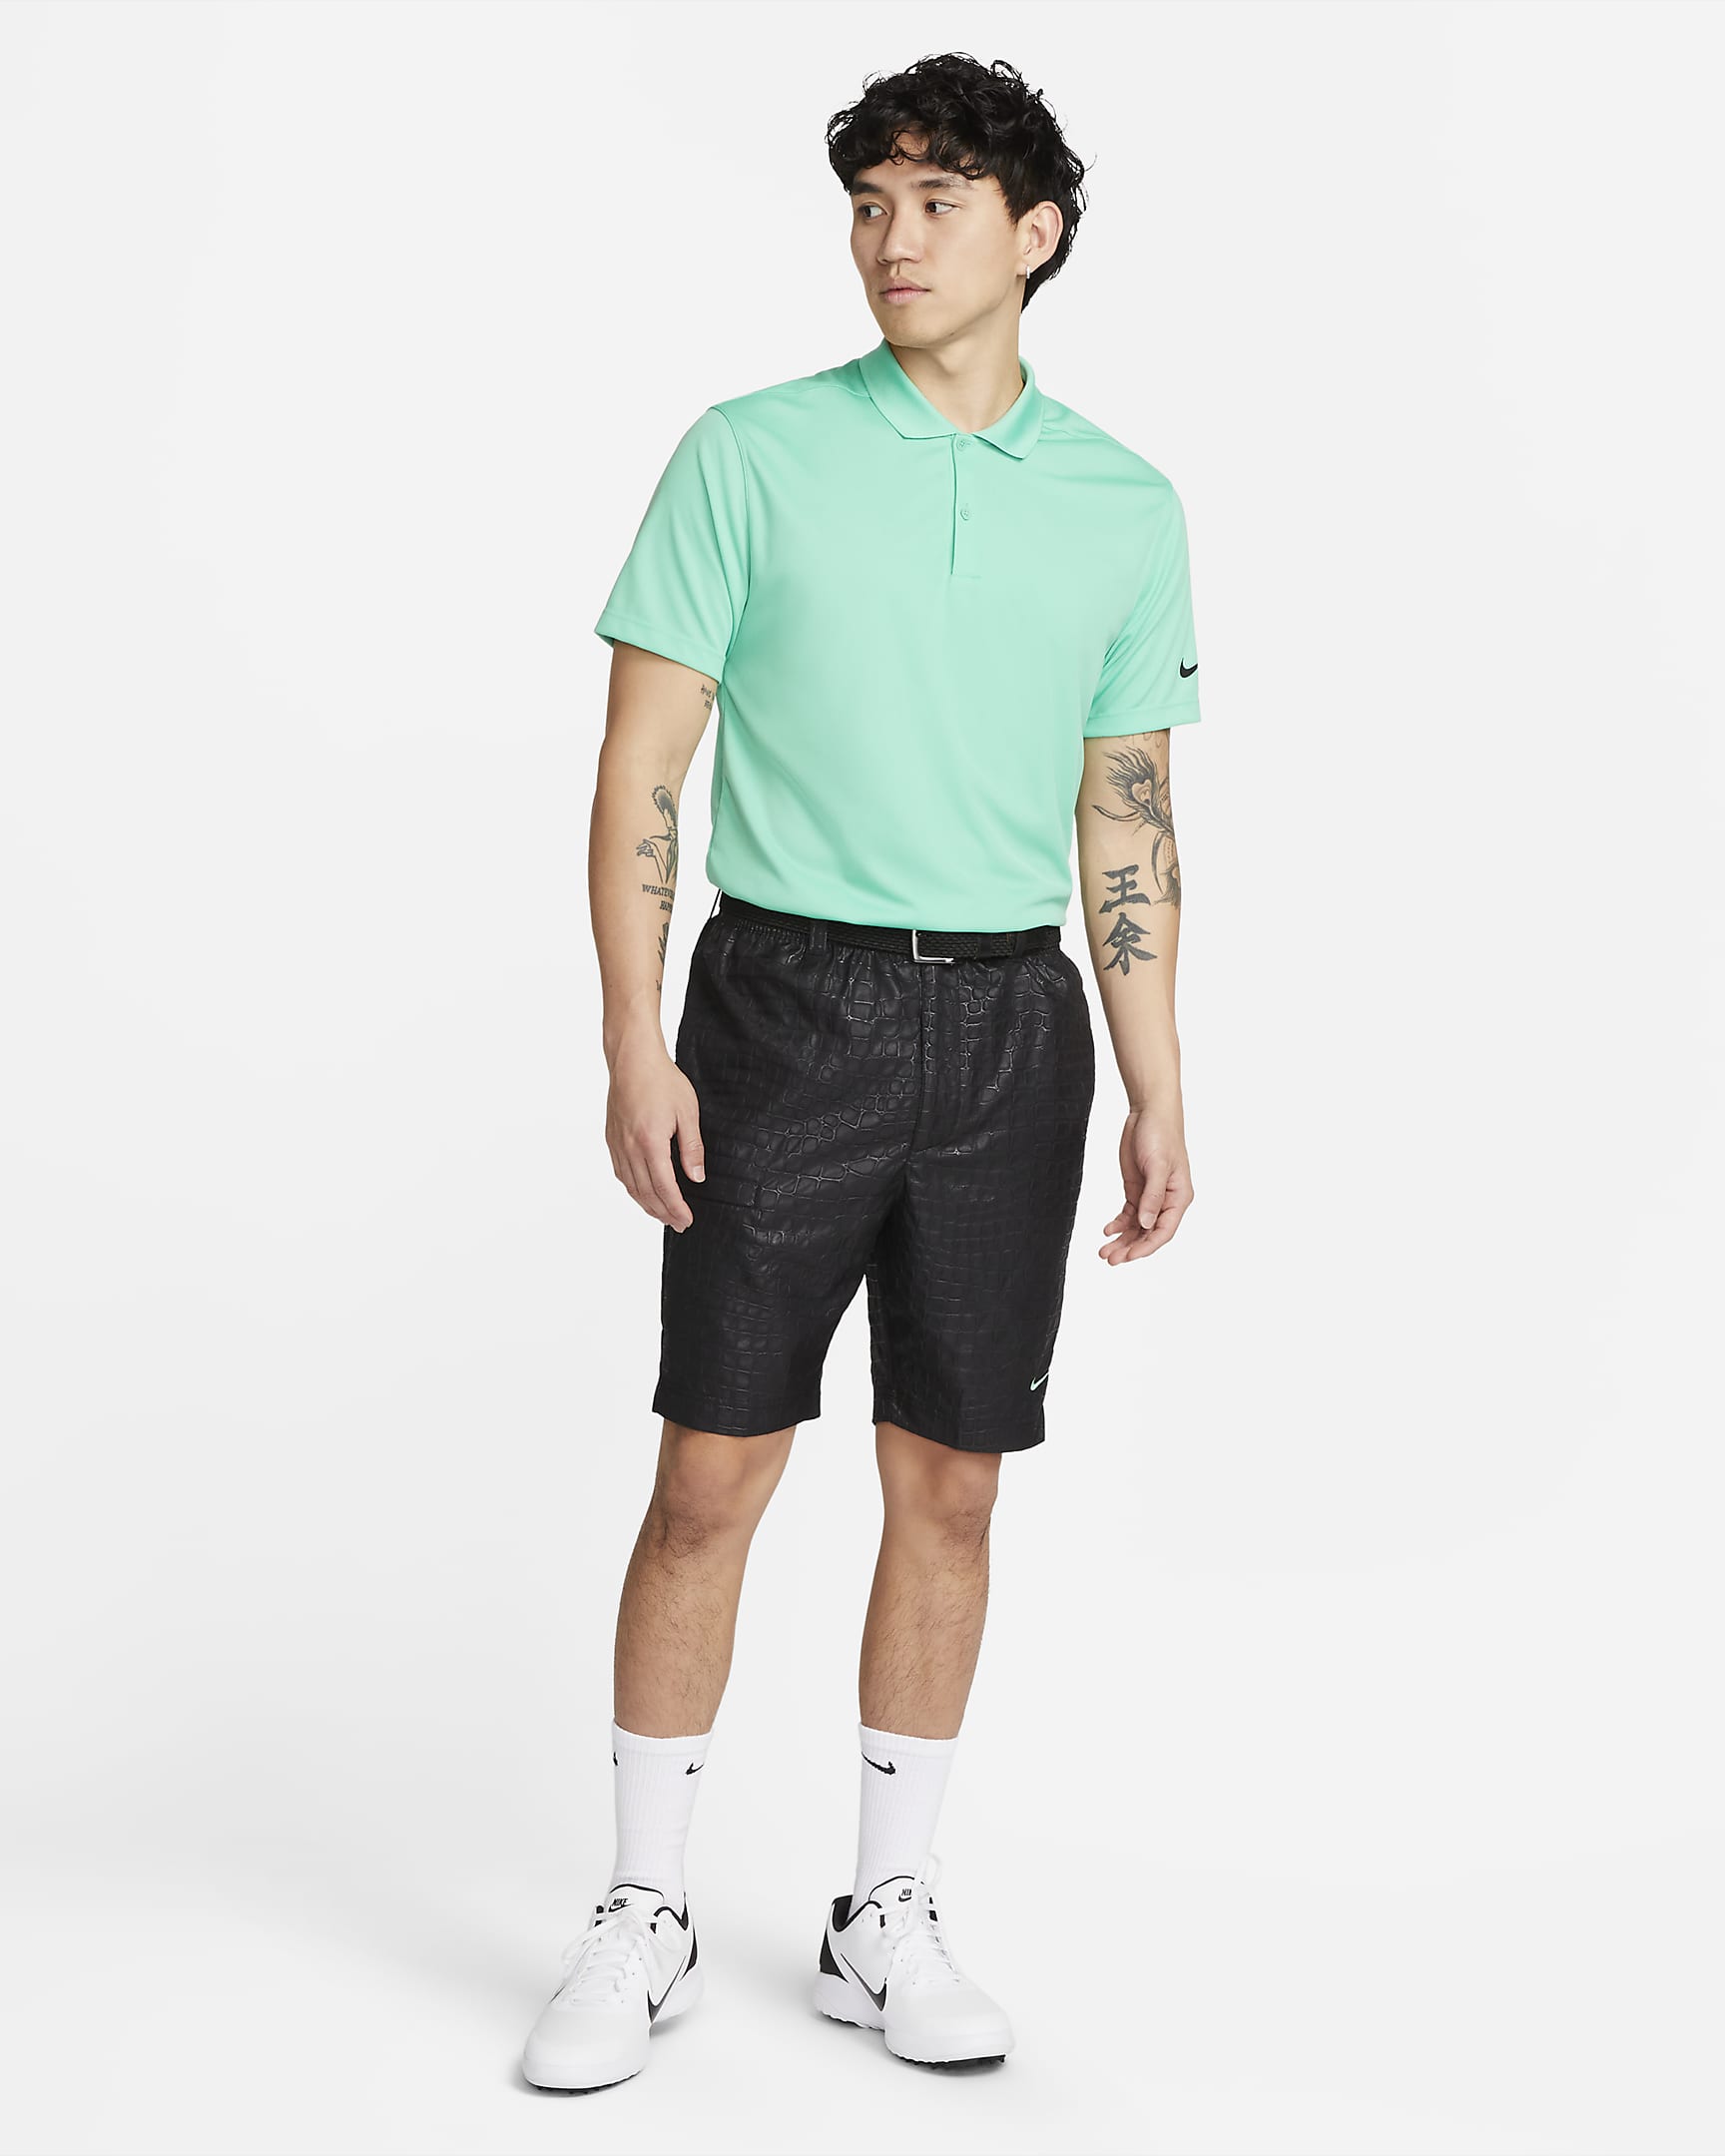 Nike Unscripted Men's Golf Shorts. Nike IN